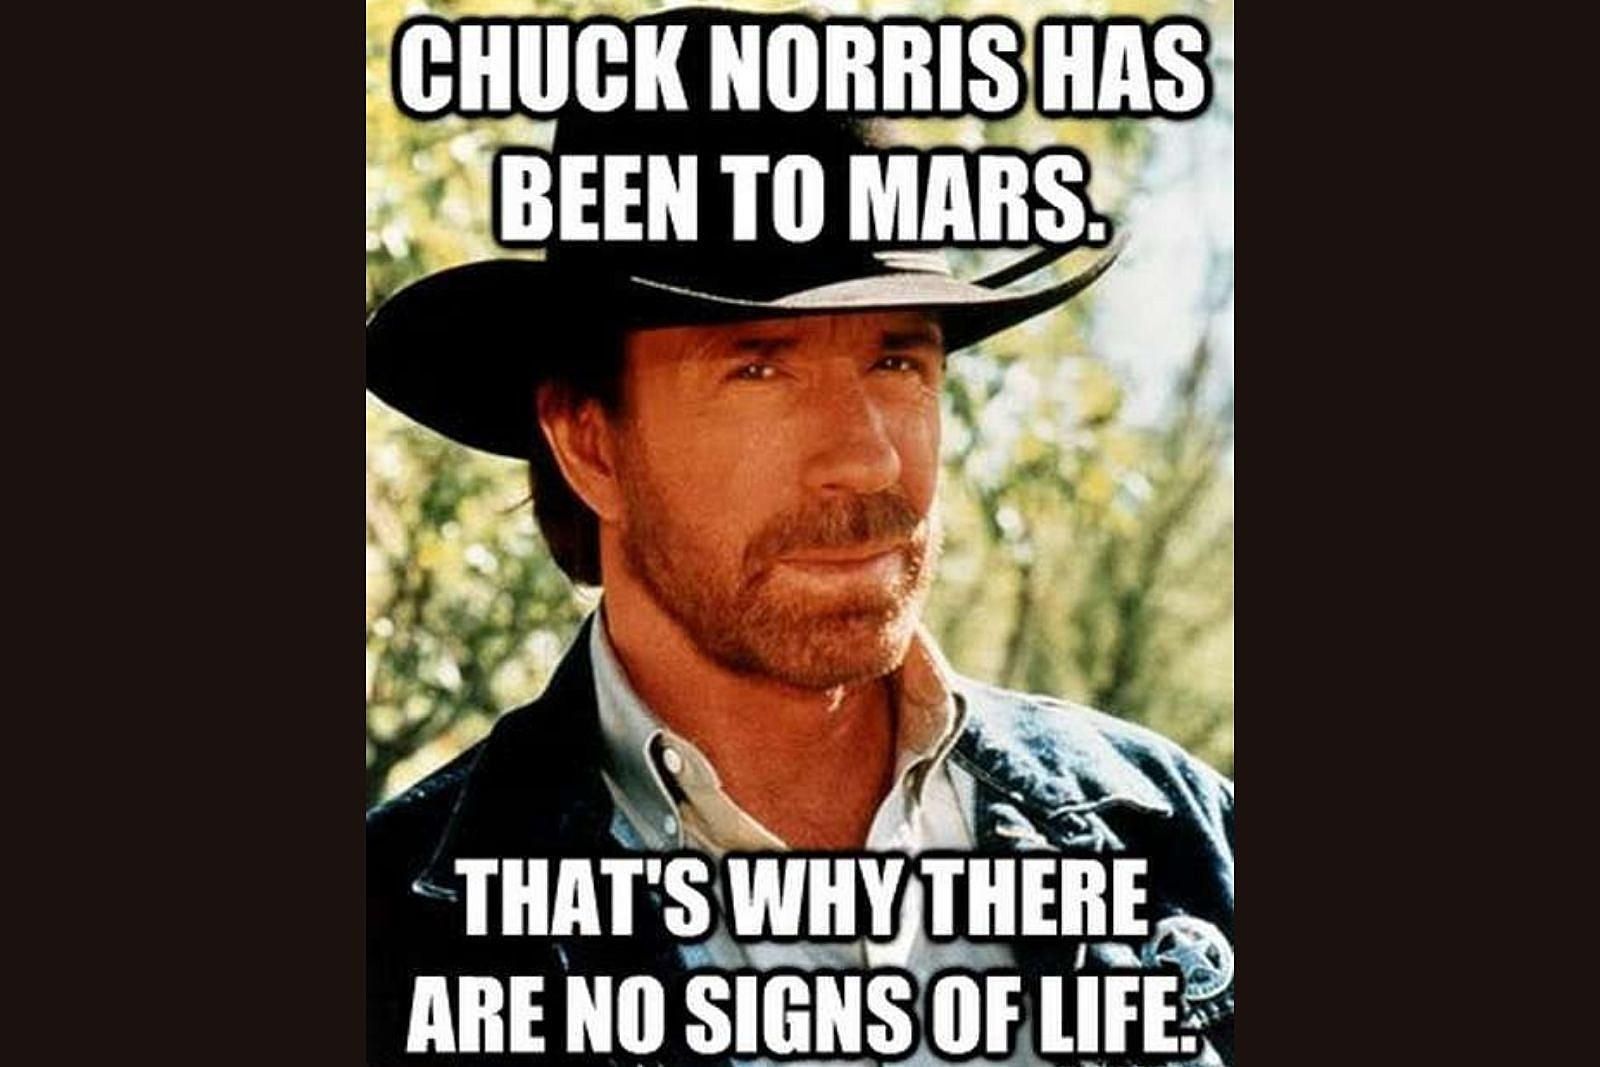 CHUCK NORRIS HAS
BEEN TO MARS.
THAT'S WHY THERE
ARE NO SIGNS OF LIFE